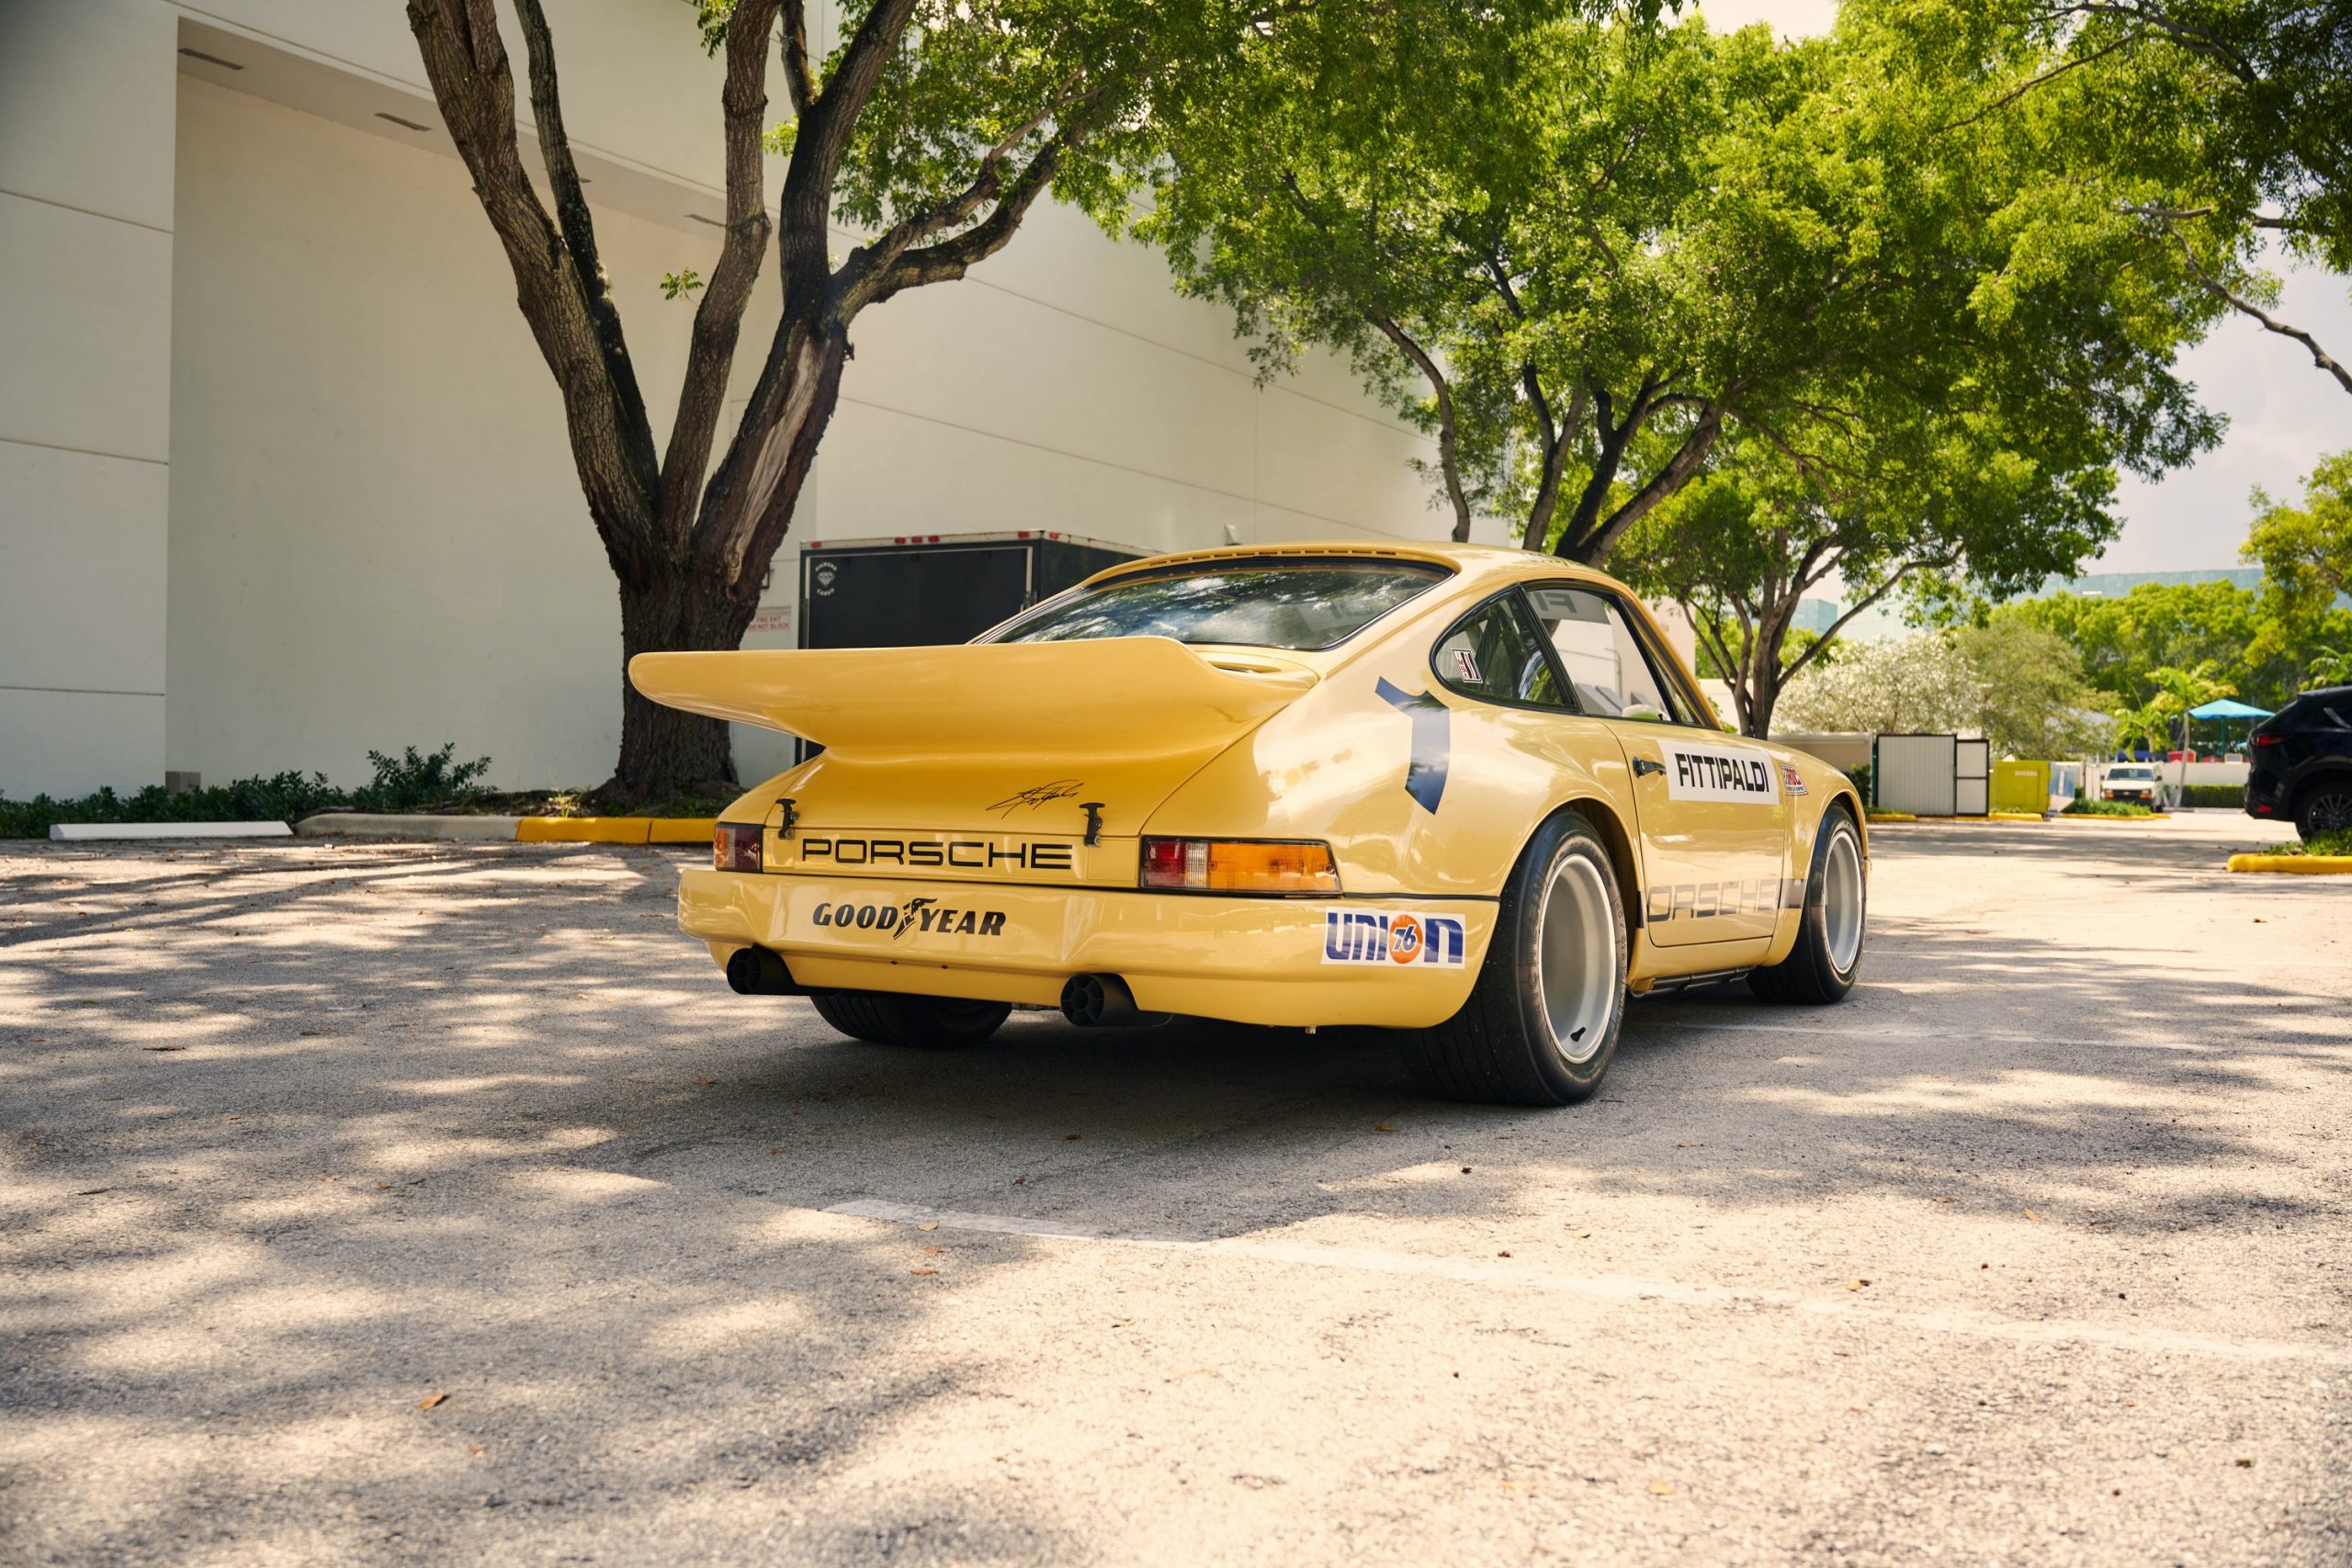 The rear of the Porsche 911 RSR race car owned by Pablo Escobar